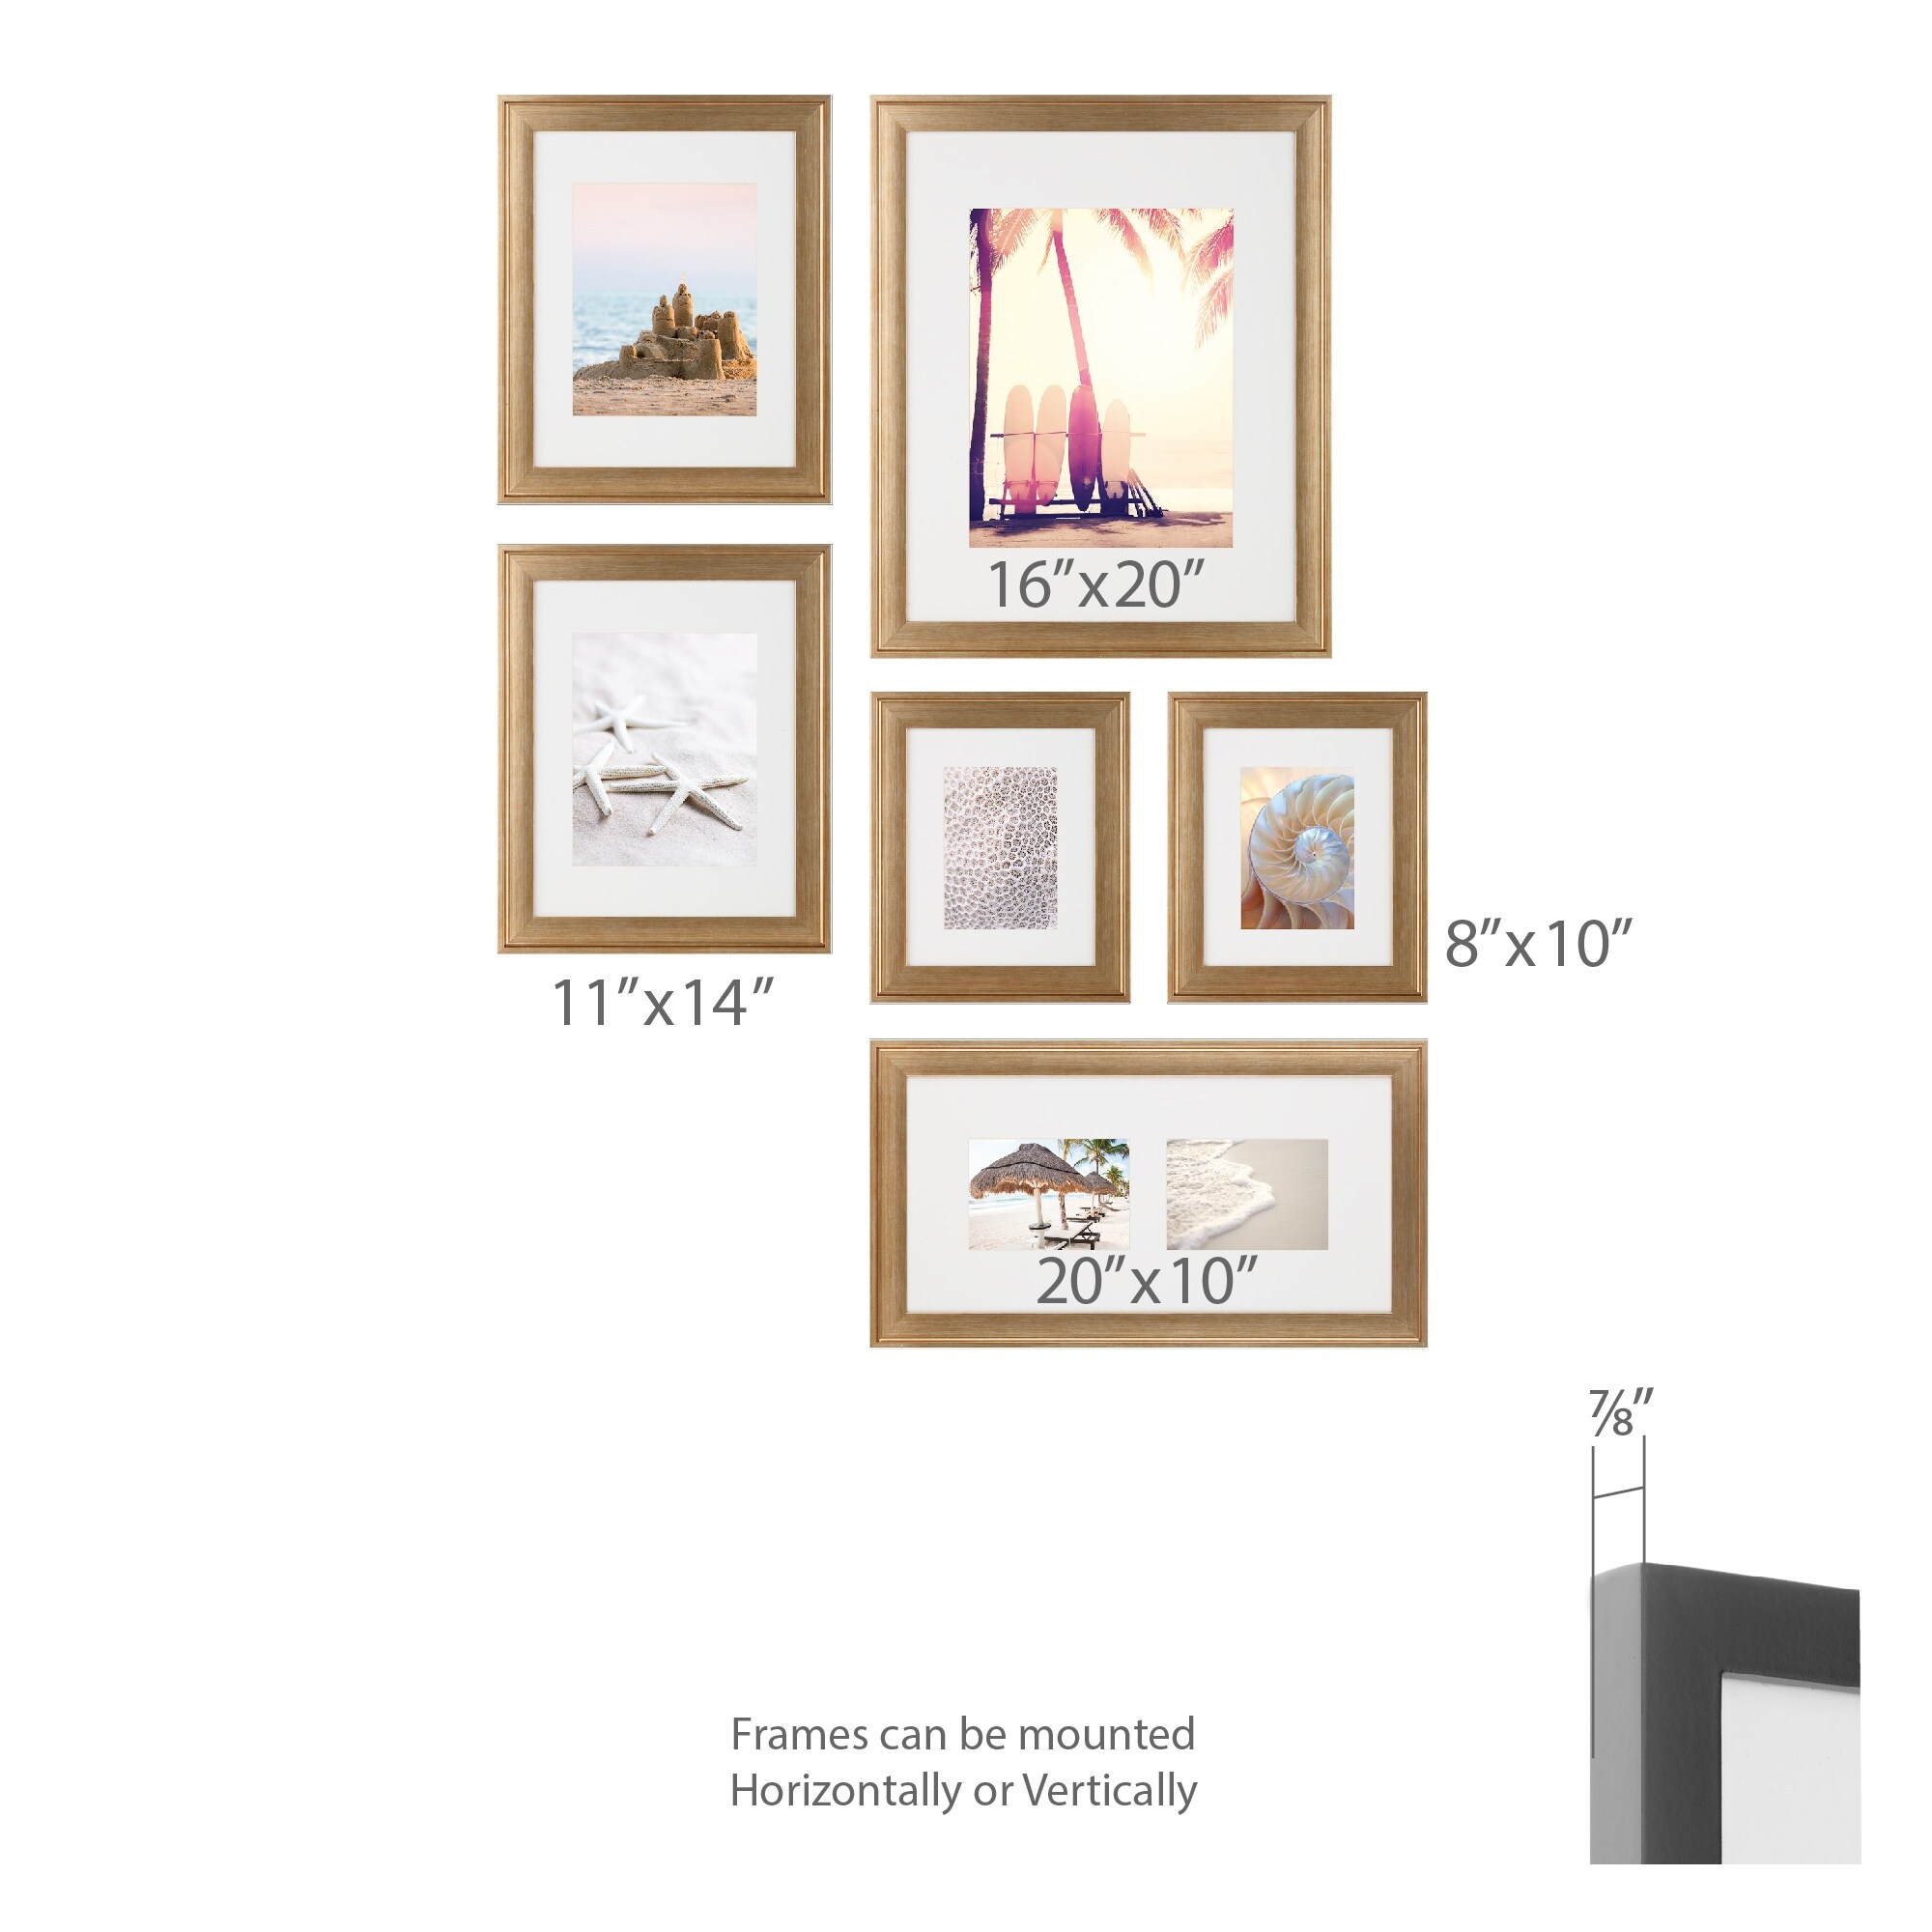 https://ak1.ostkcdn.com/images/products/is/images/direct/58ca974bc7dbe1b2b951ae9975daa652d136903b/6-Piece-Gallery-Wall-Picture-Frame-Set-in-Multiple-Sizes-with-Decorative-Art-Prints-%26-Hanging-Template.jpg